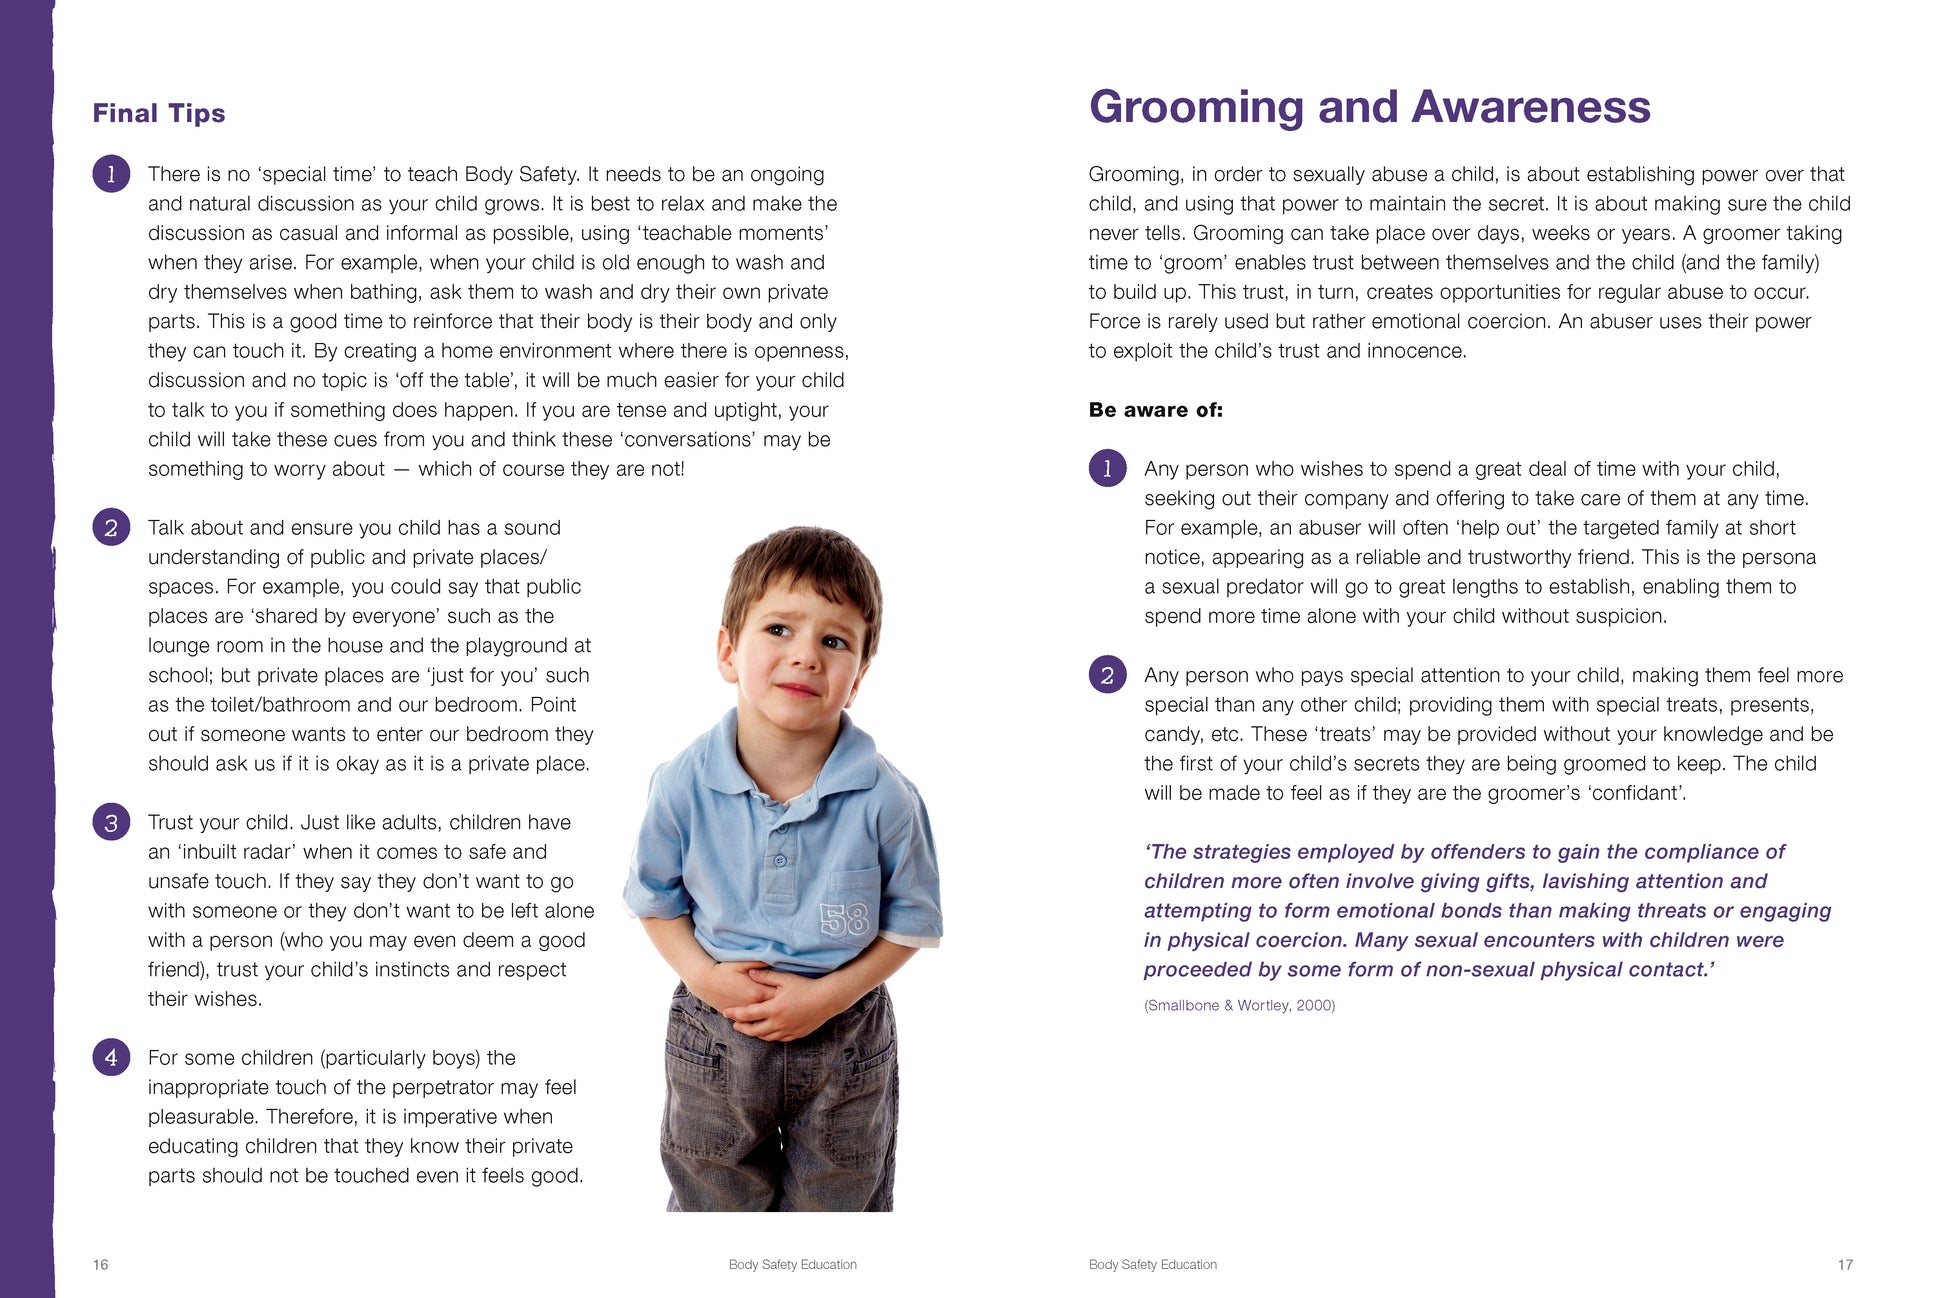 A page from the book 'Body Safety Education' by Jayneen Sanders